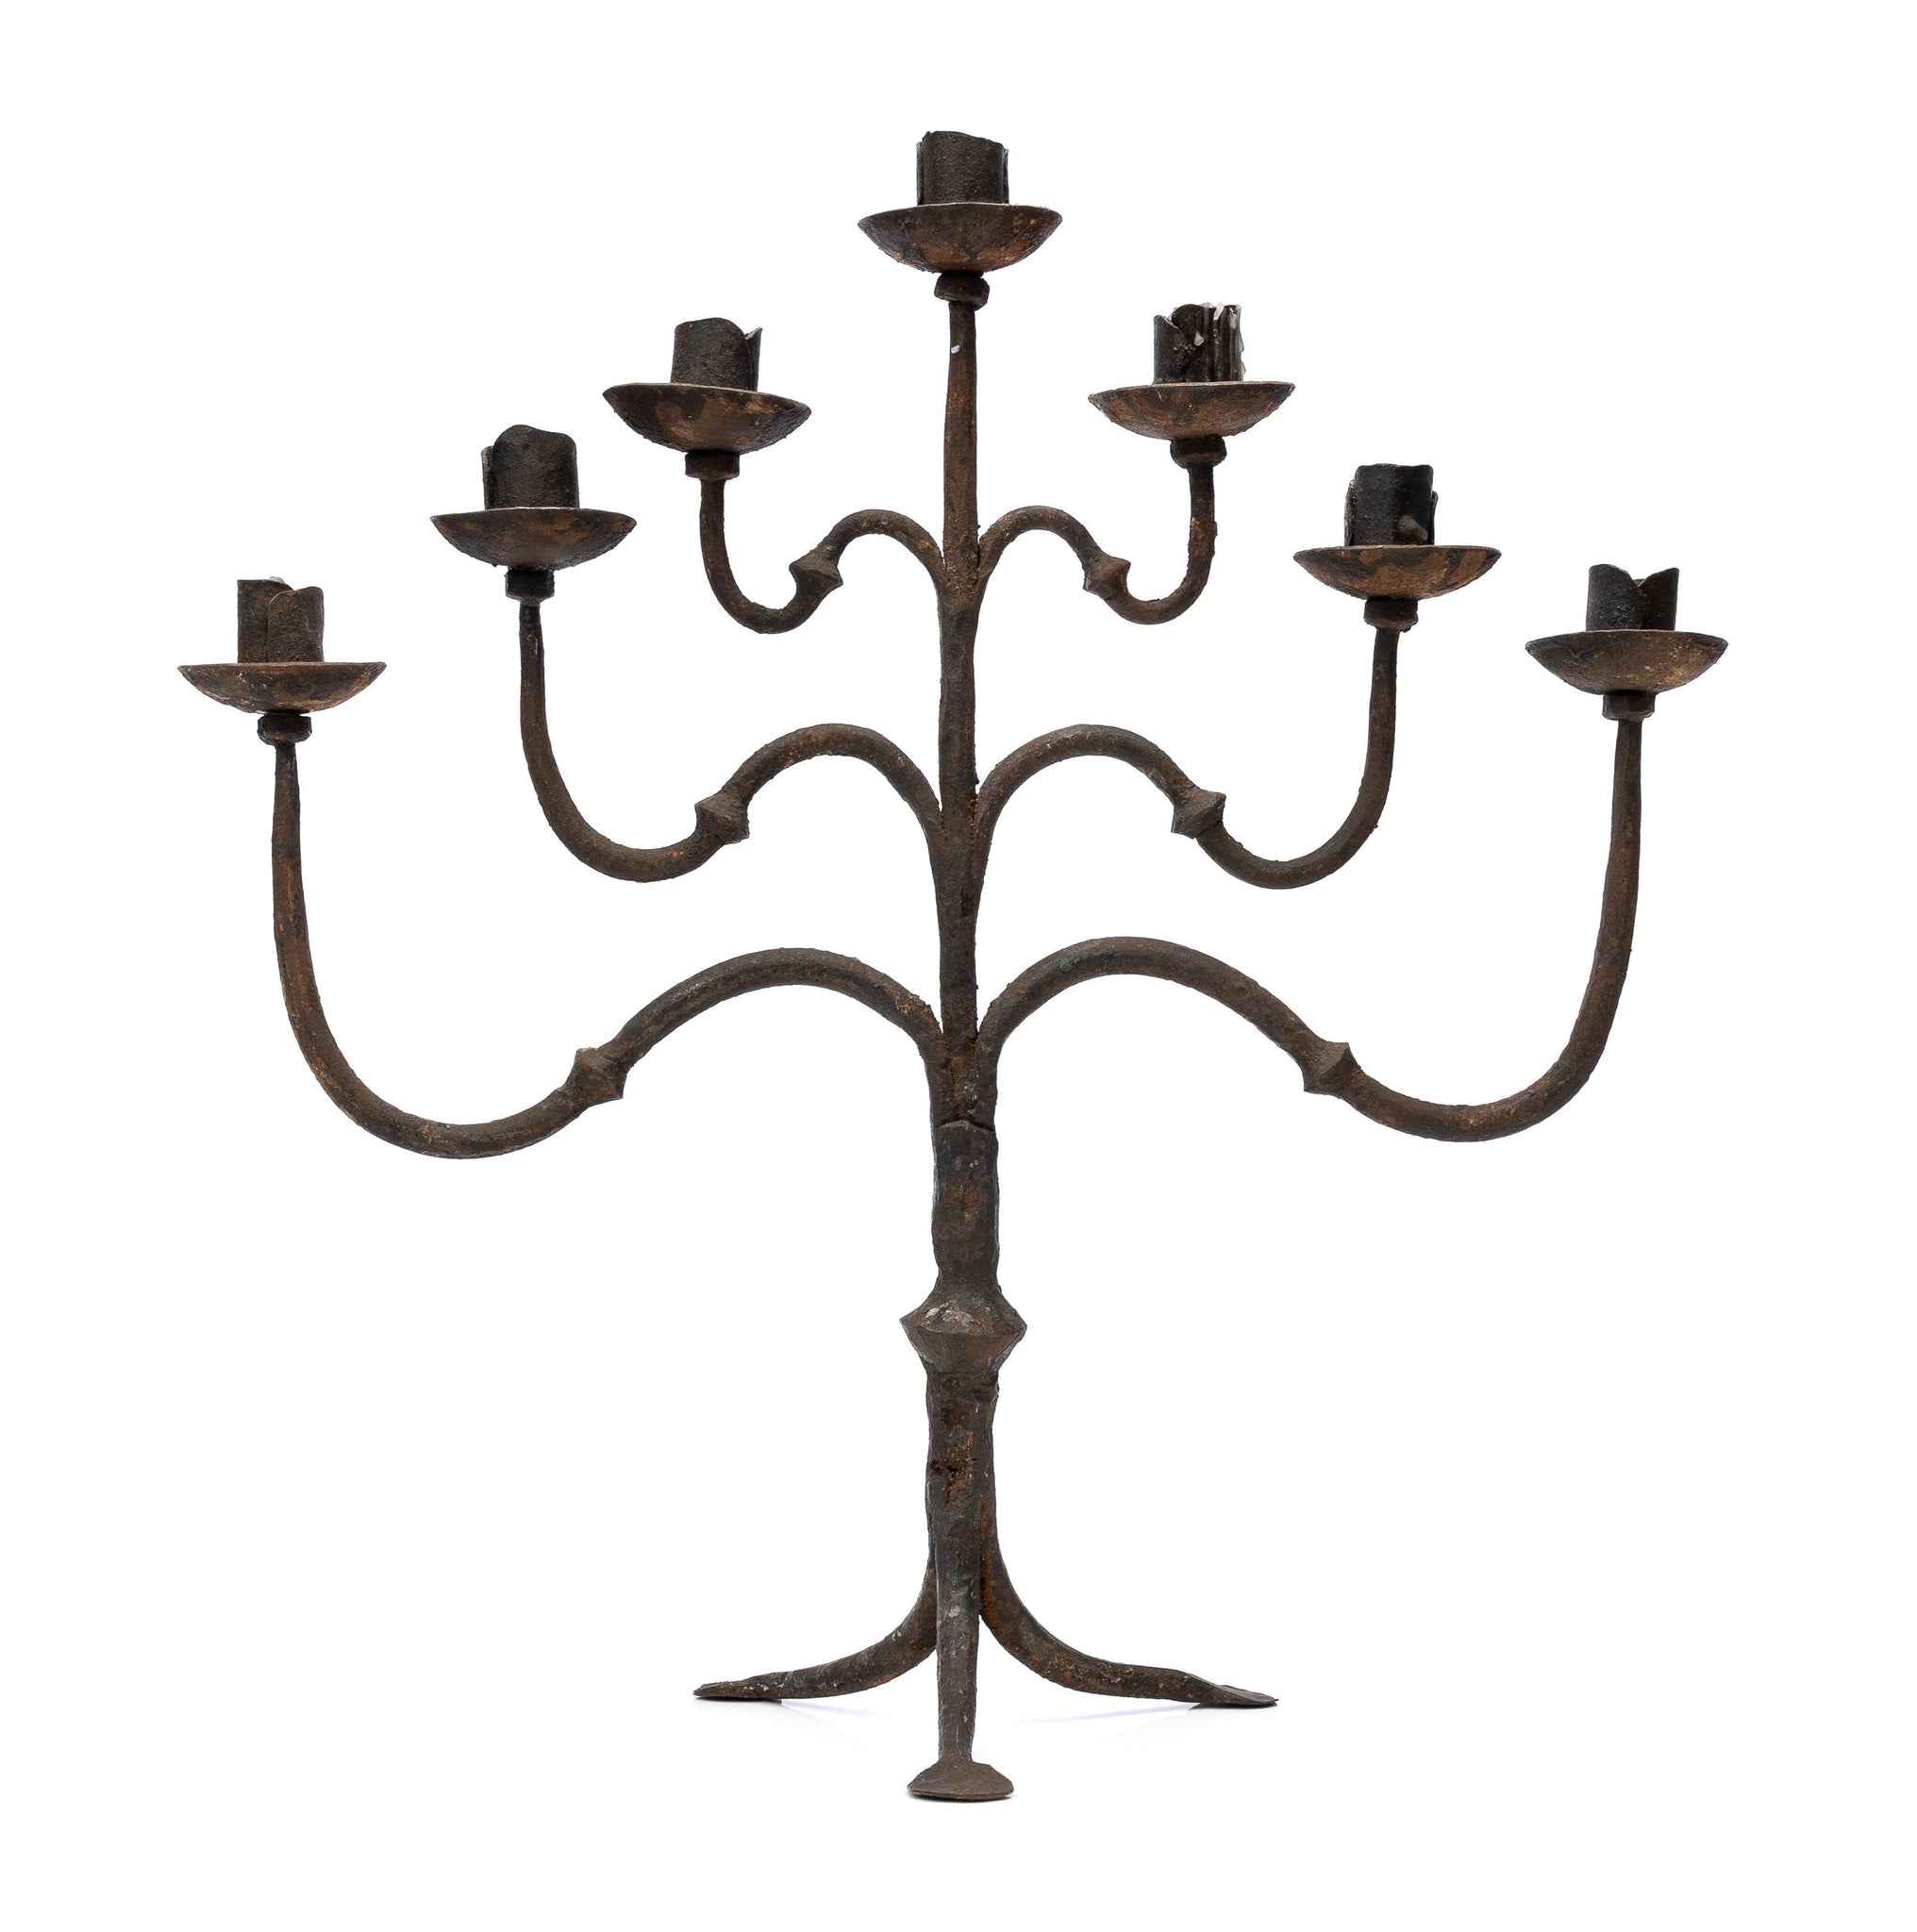 Fabulous 19th century French forged steel candelabra from estate in The French Alps